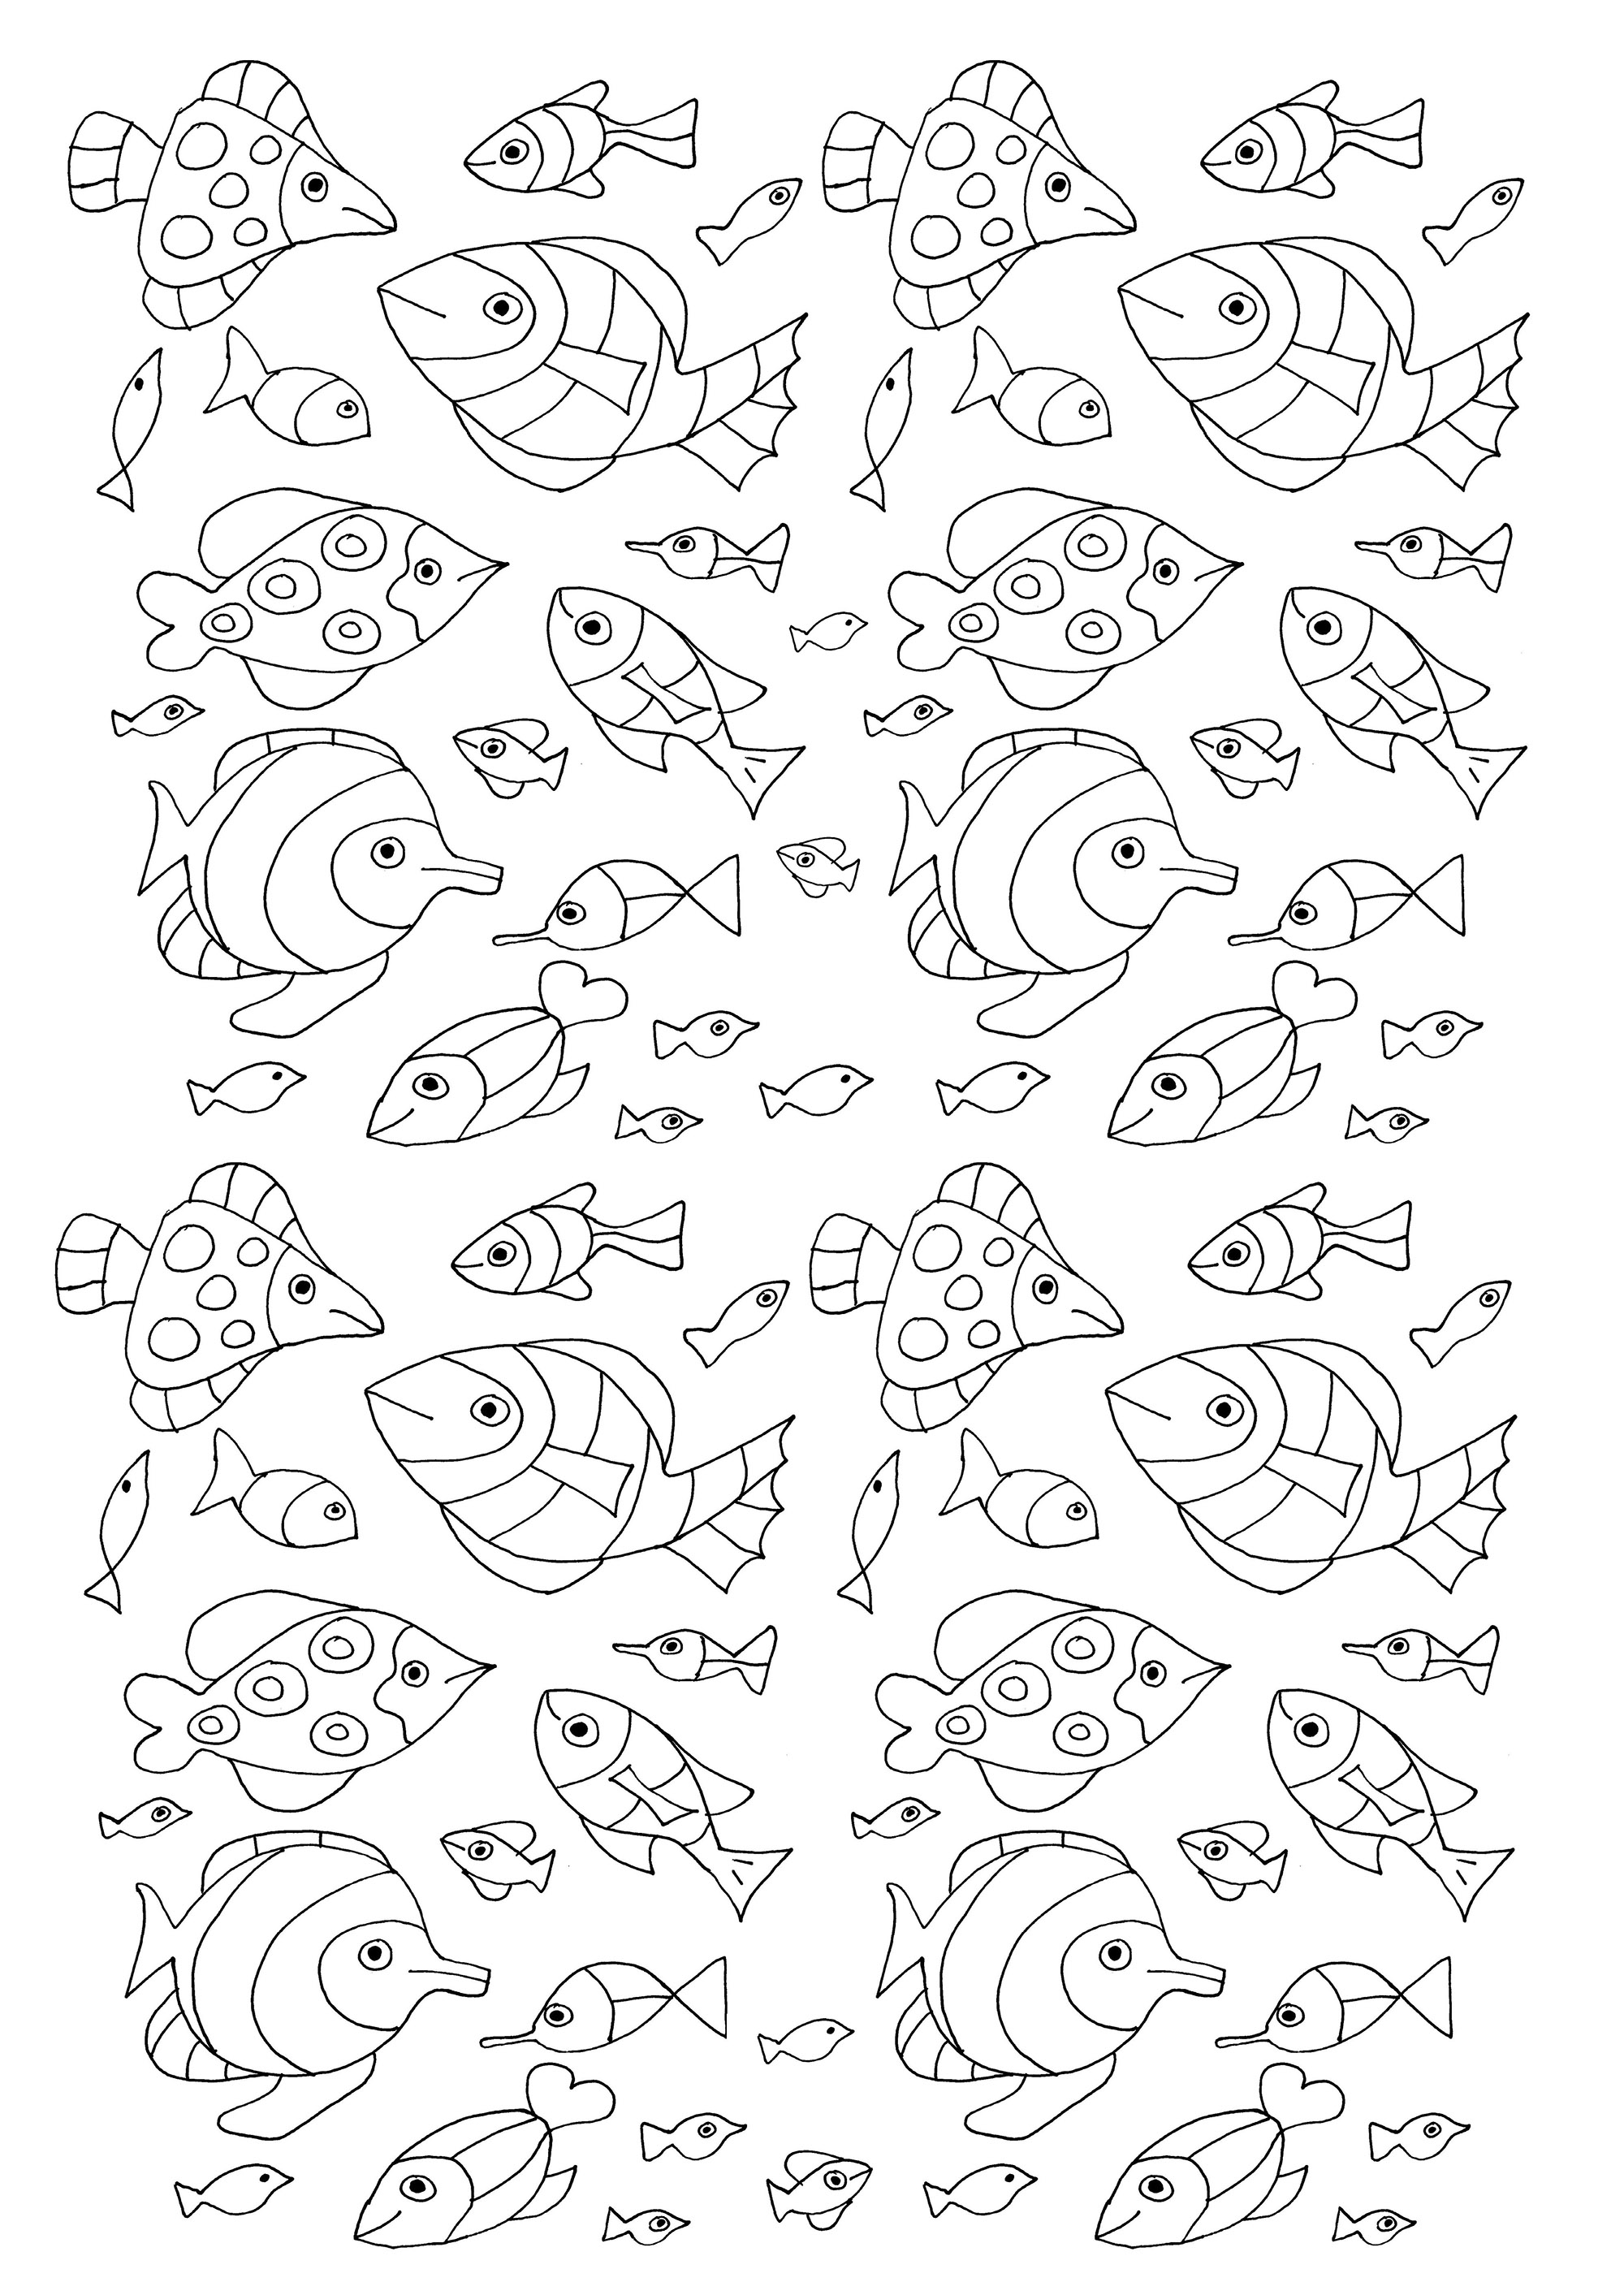 100 little fish to color. A variety of fish with simple designs that you can color in, Artist : Olivier